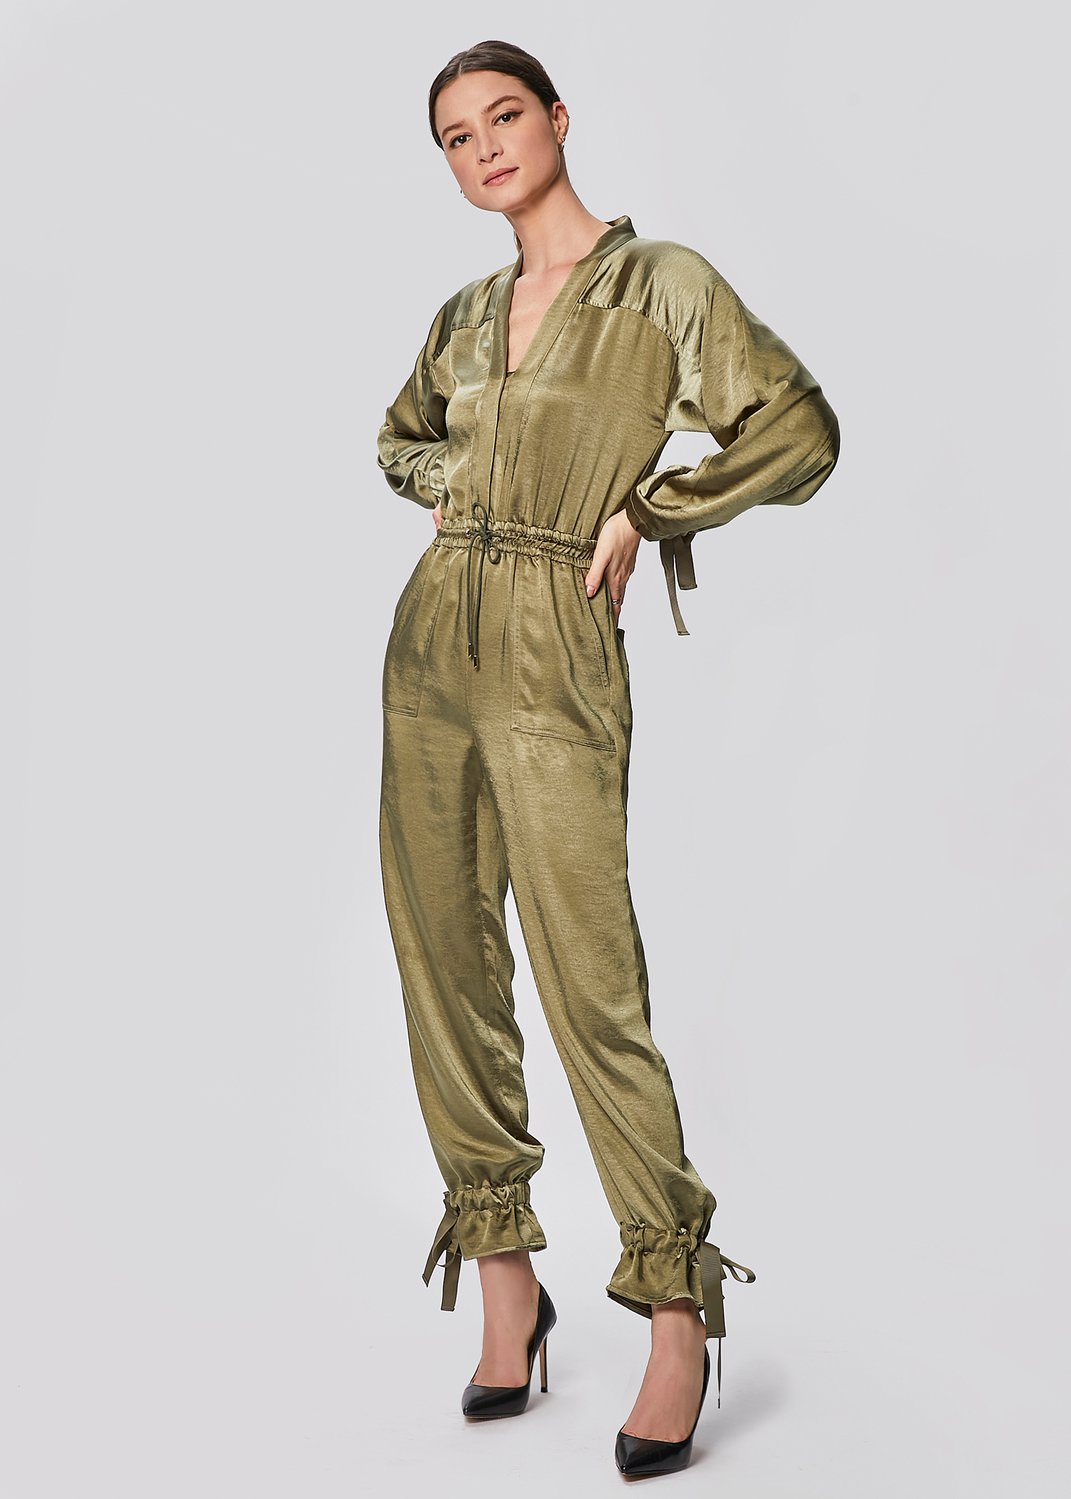 Army Green Jumpsuit Womens - Army Military